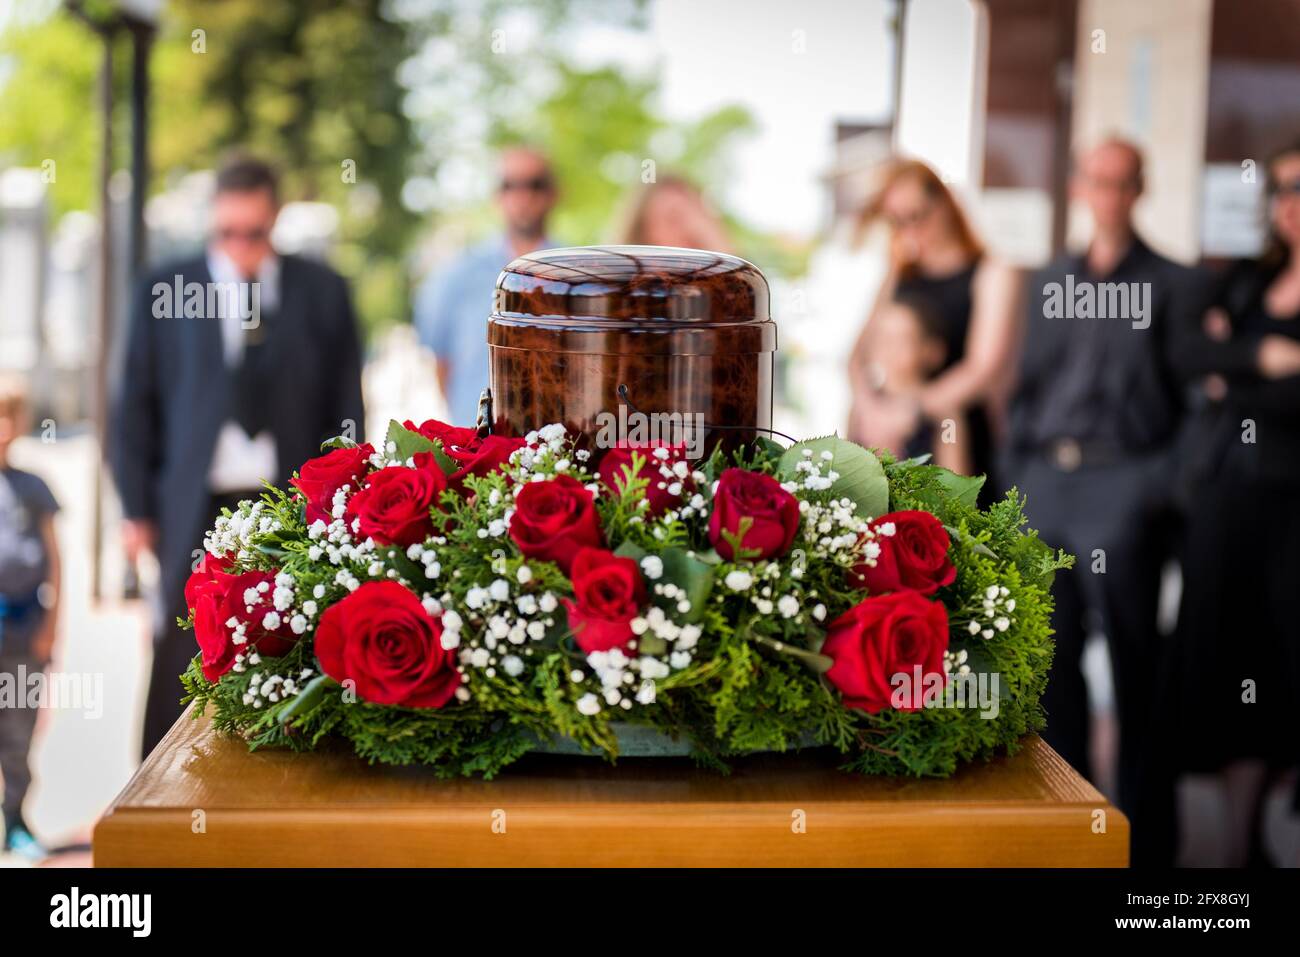 Funerary urn with ashes of dead and flowers at funeral. Burial urn decorated with flowers and people mourning in background at memorial service, sad a Stock Photo